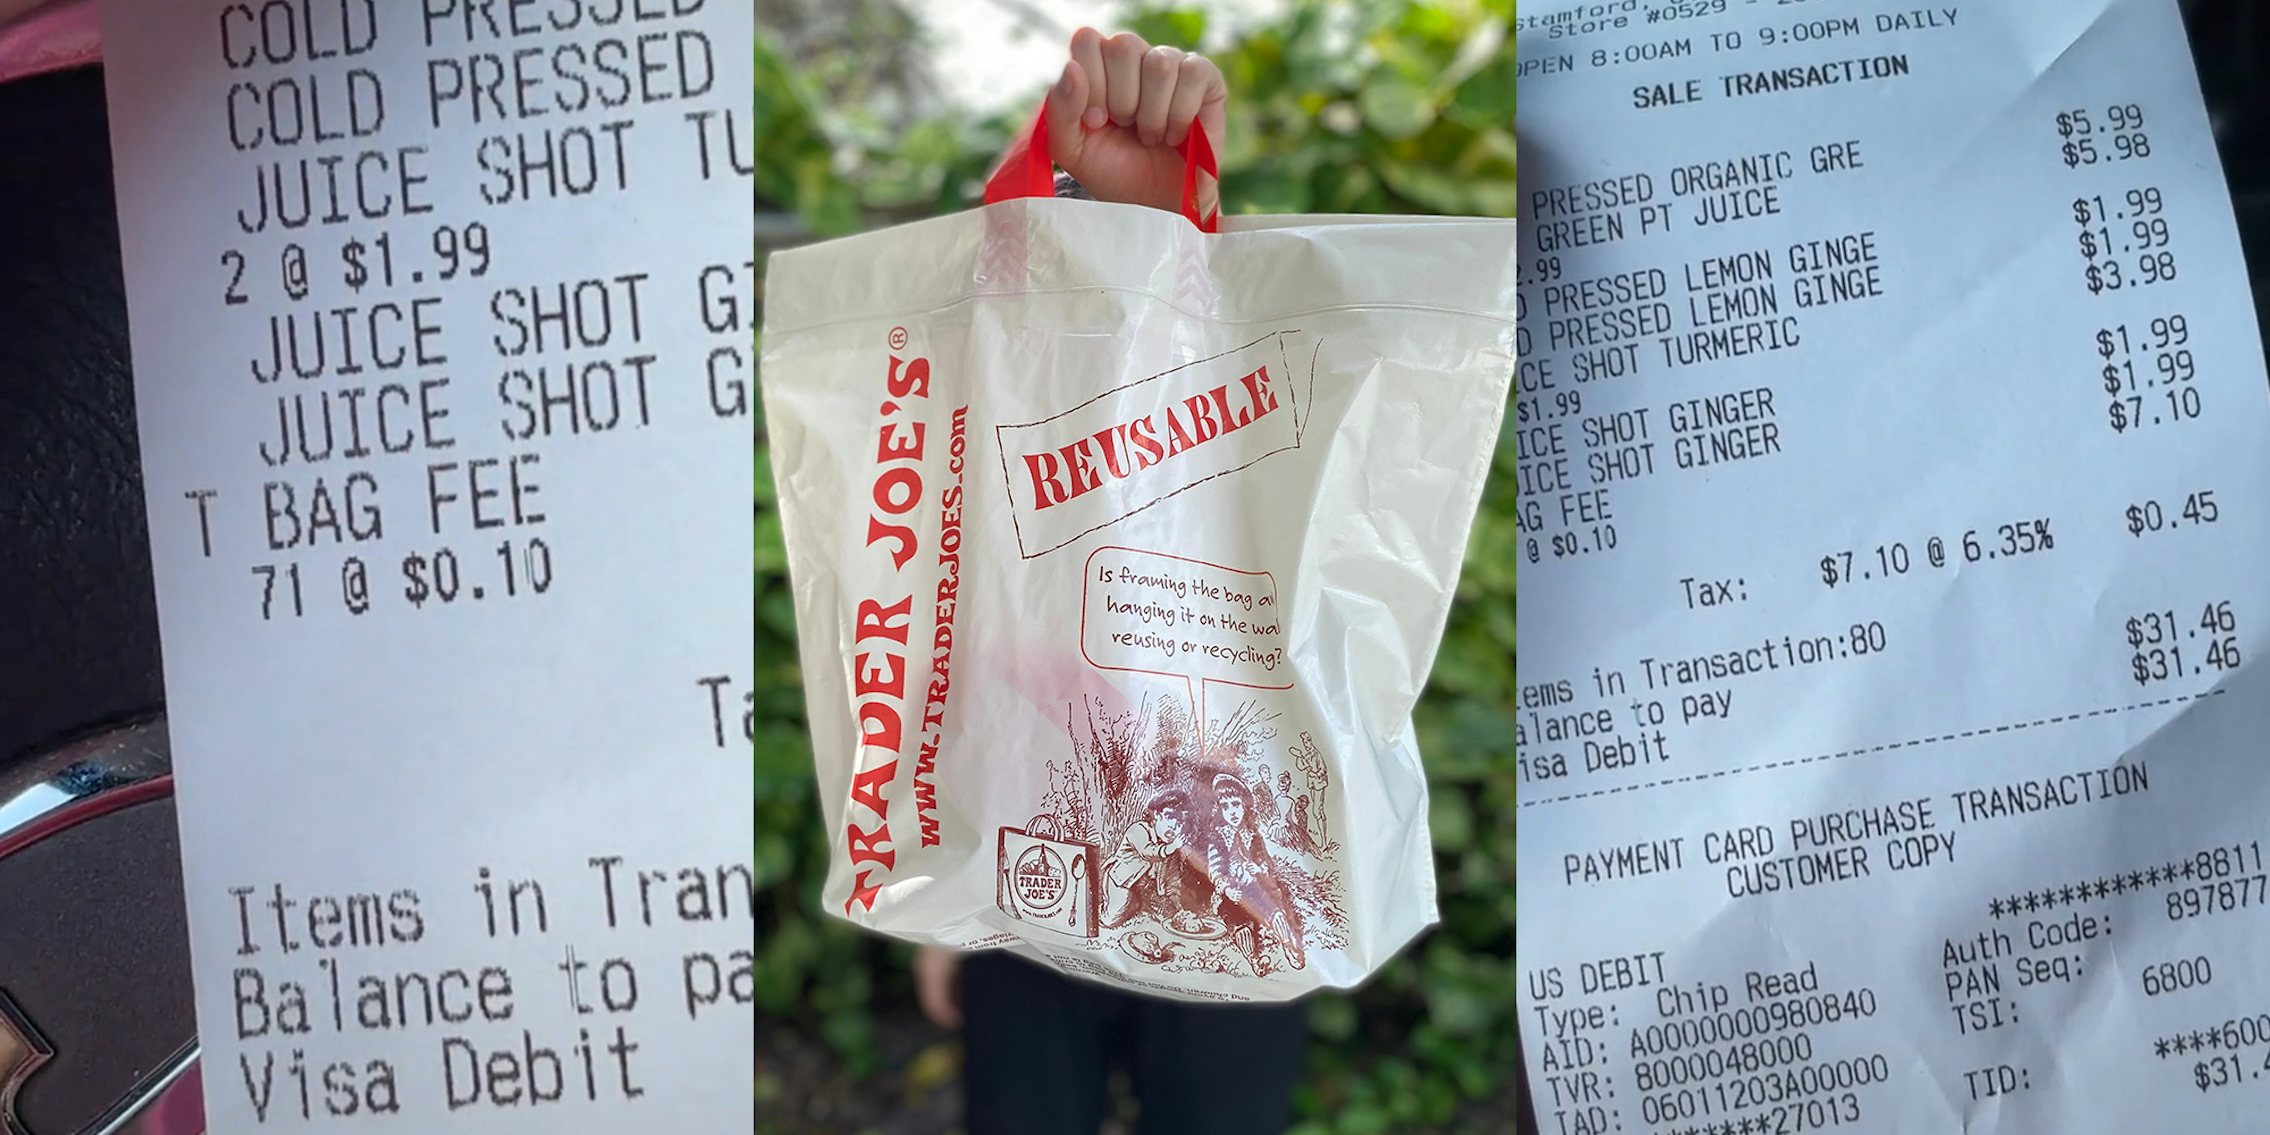 receipt with 'T BAG FEE 71 @ $0.10' (l) hand holding Trader Joe's reusable bag (c) Trader Joe's receipt (r)